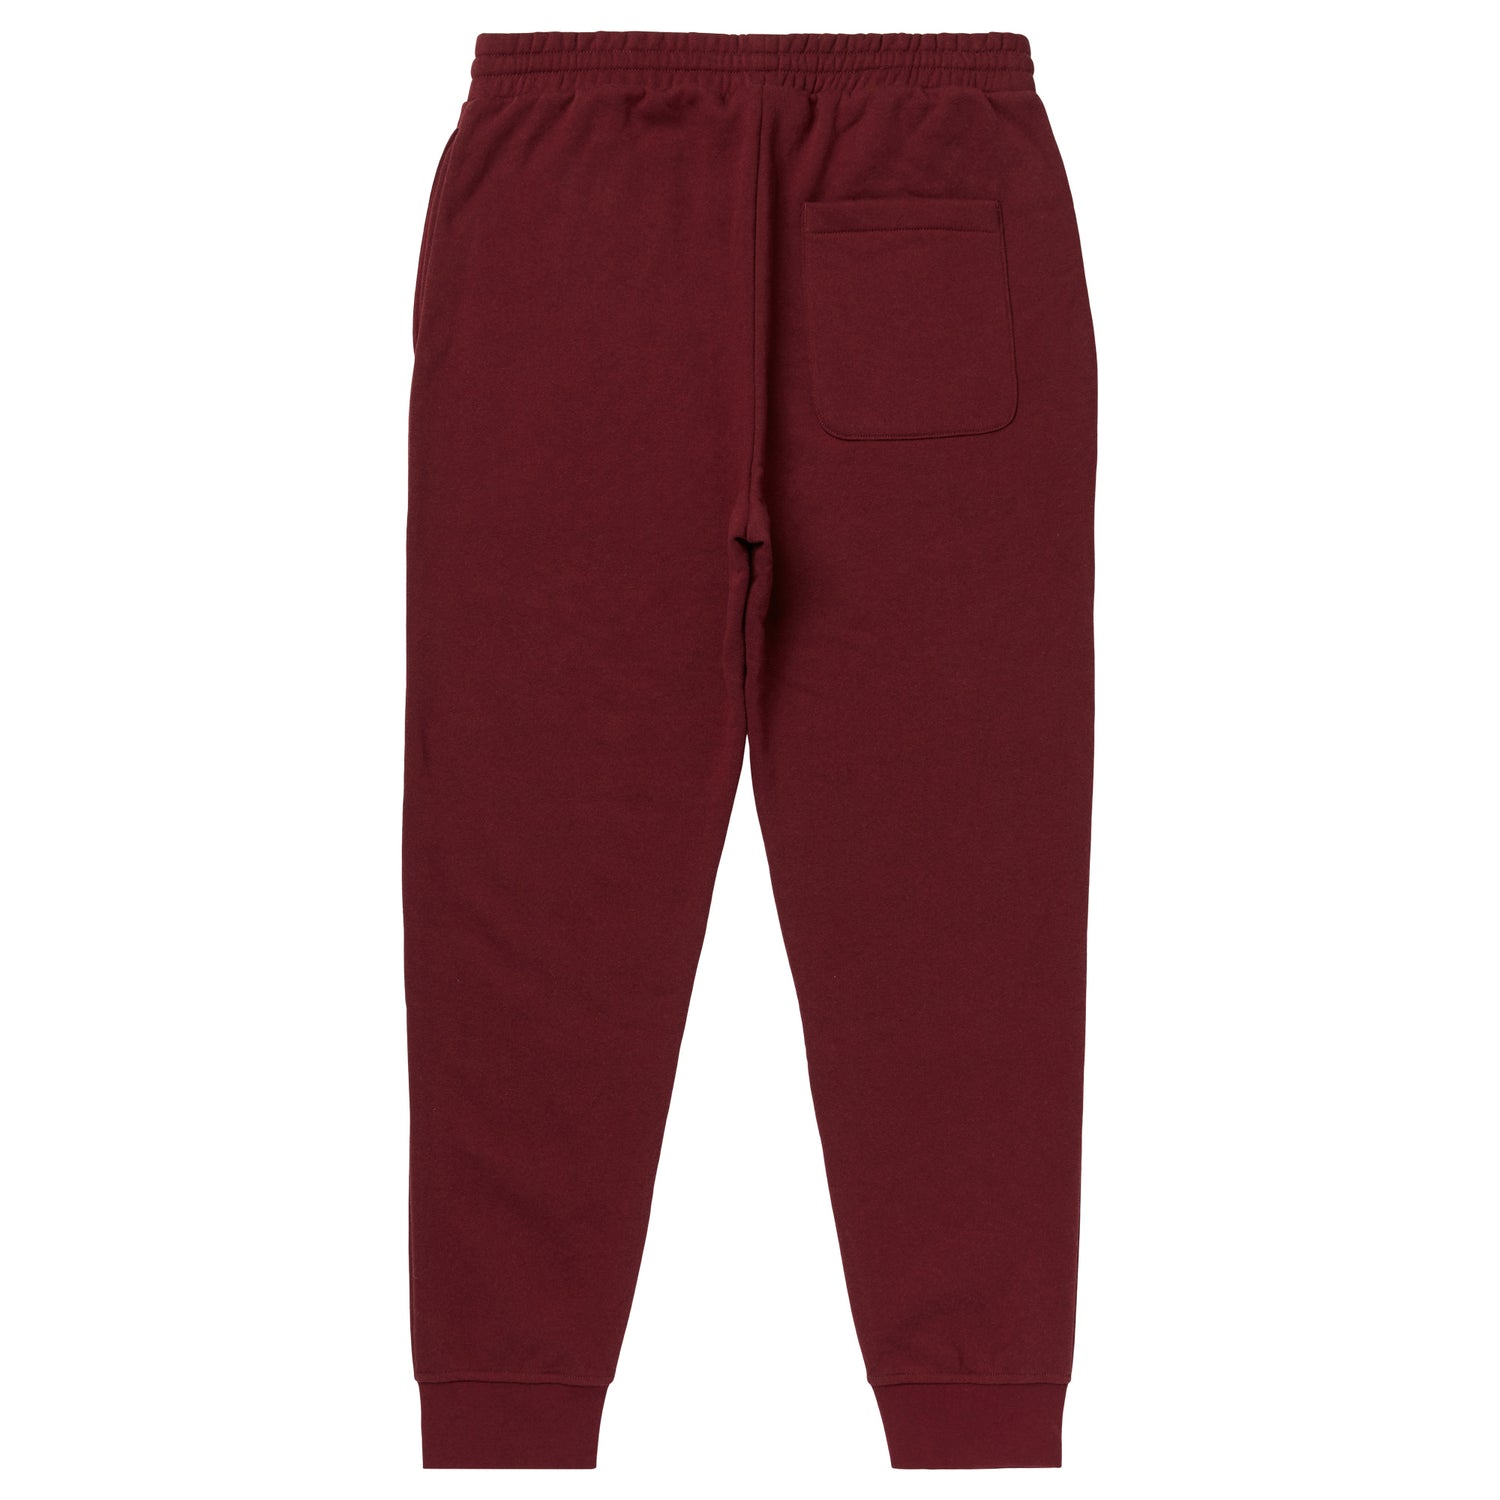 LOVE FOR EVERYBODY JOGGER SWEATPANTS - BURGUNDY